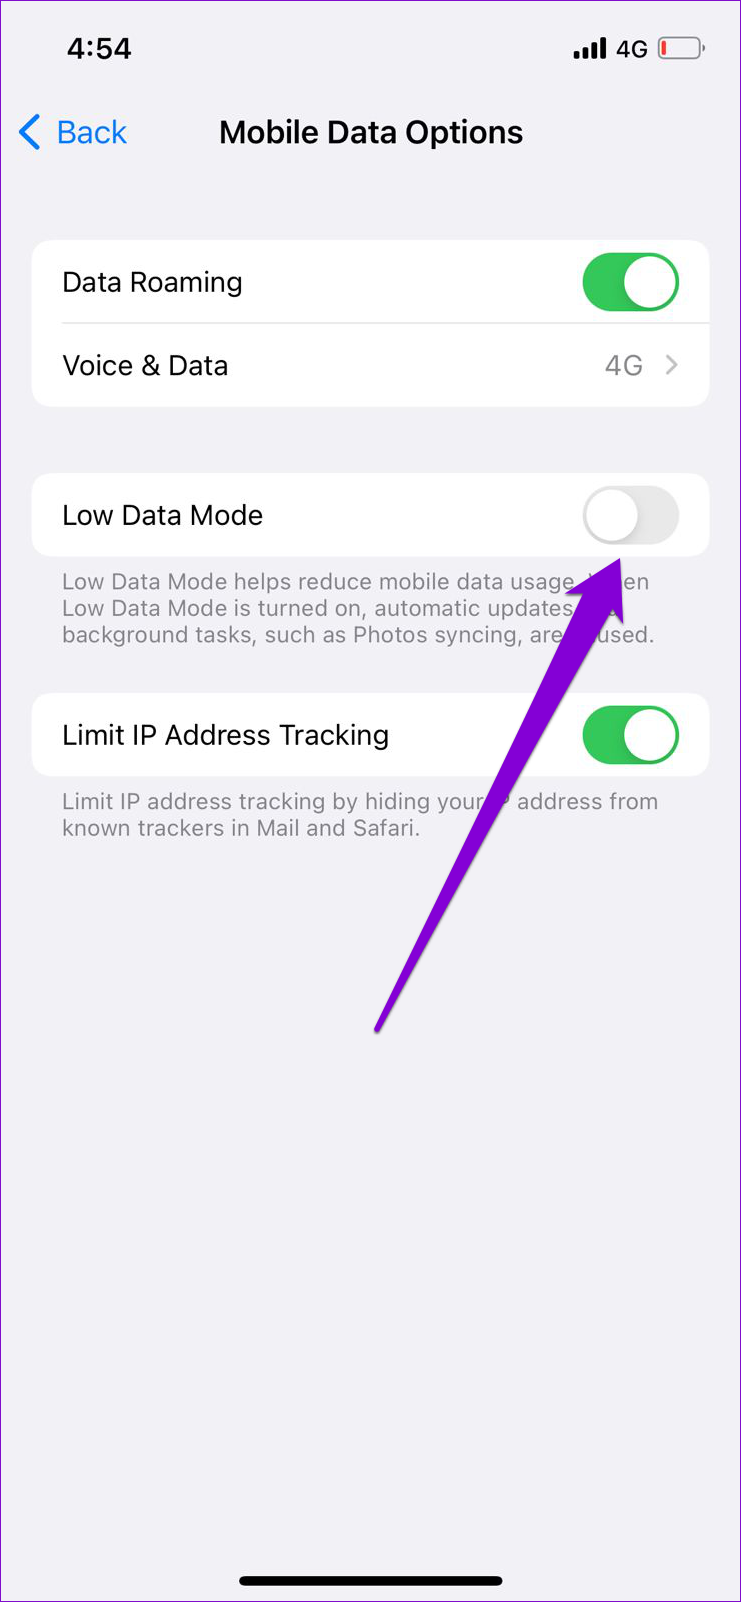 Turn Off Low Data Mode on Mobile Data